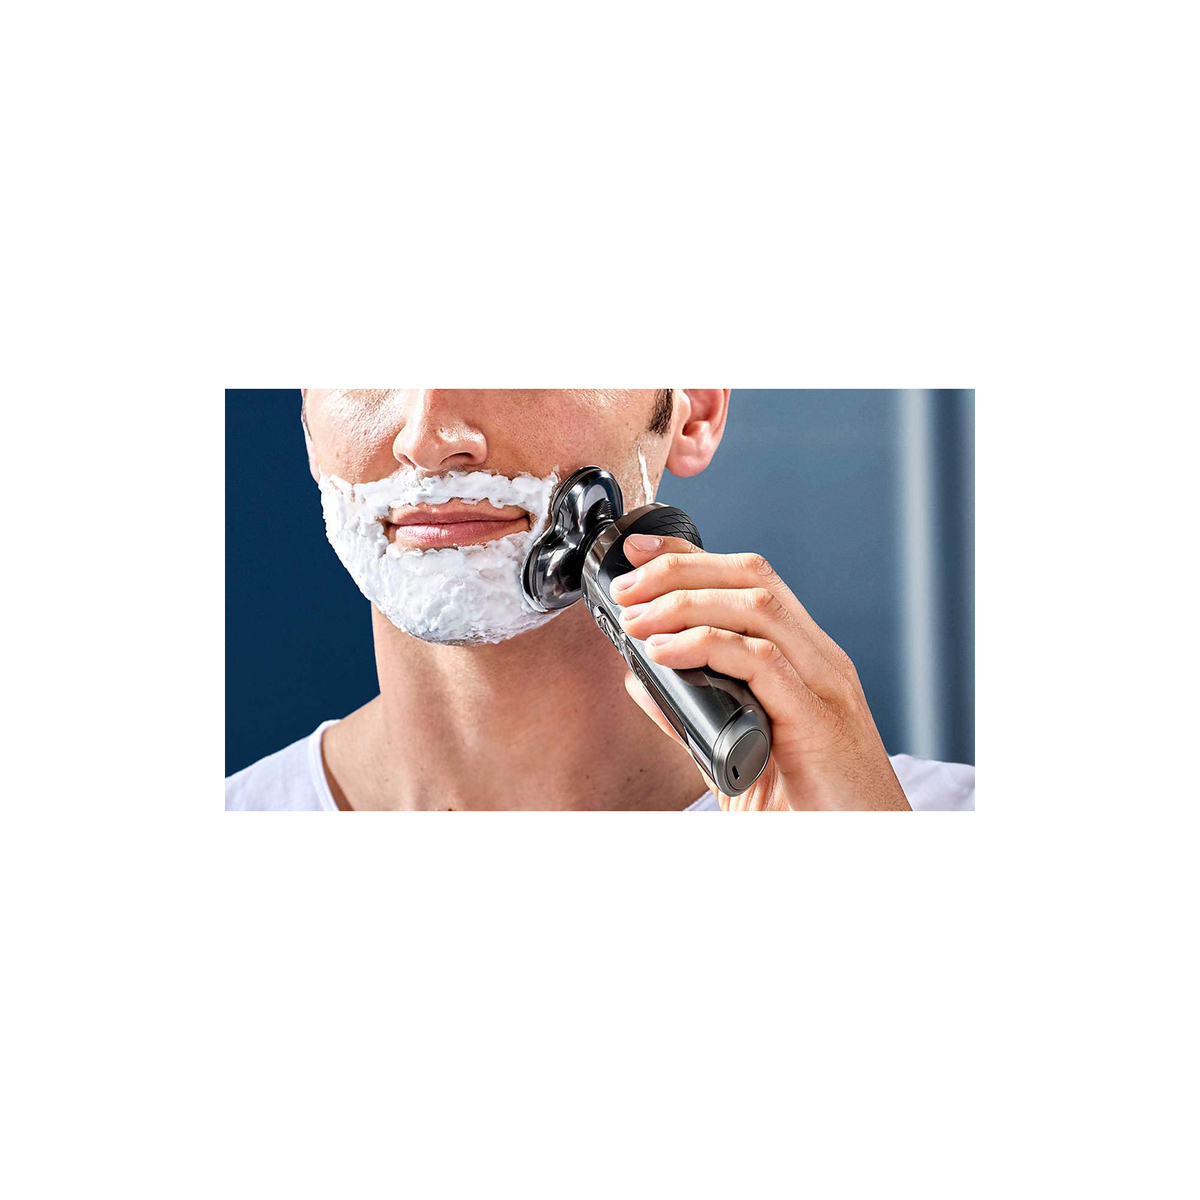 Philips Wet & dry electric shaver SP9860/13